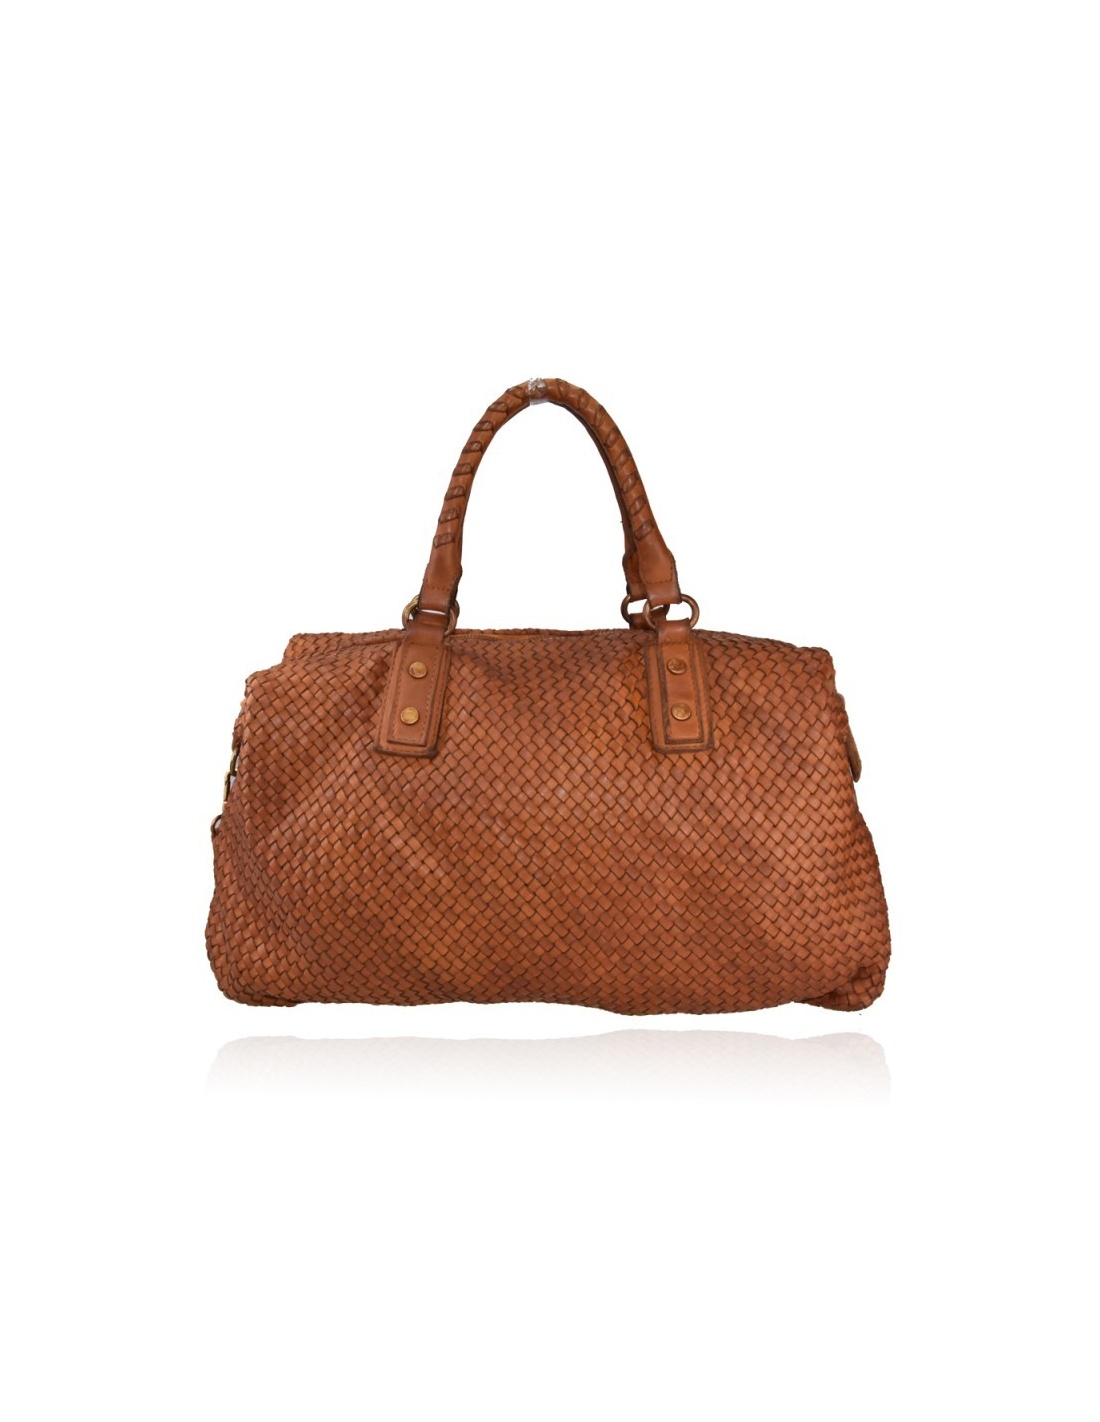 Italian Leather Handbags and Leather Bags Made in Italy